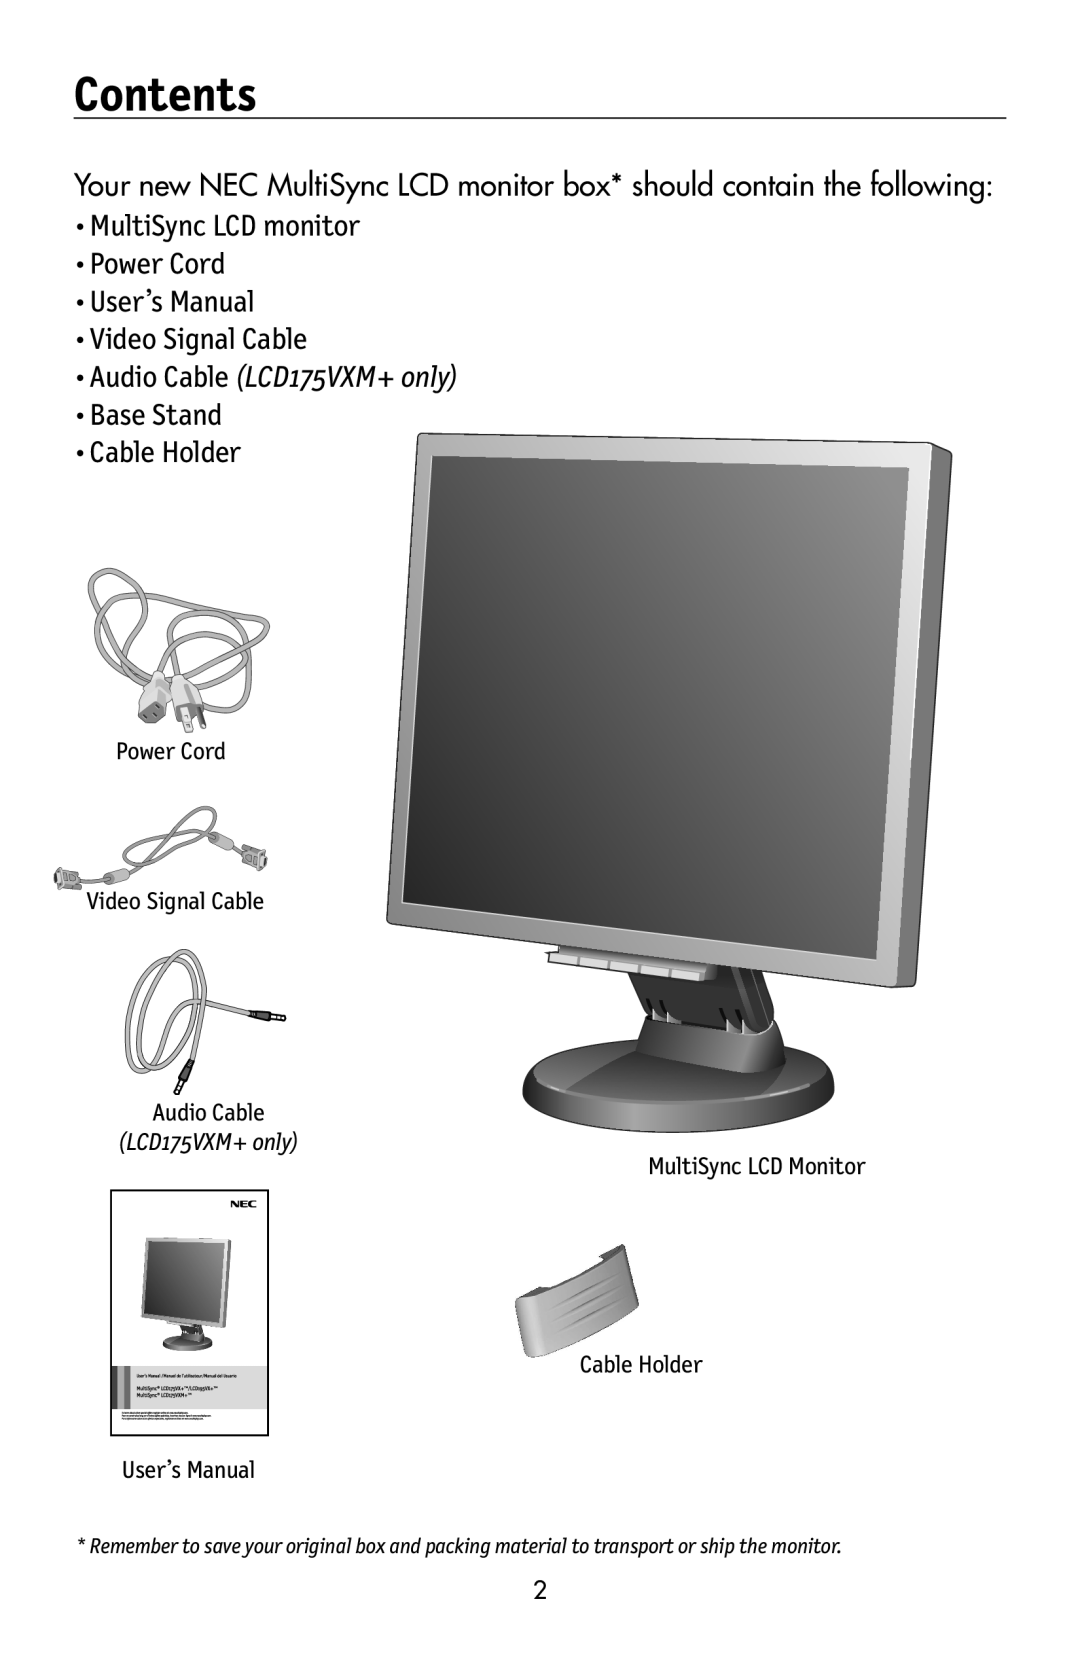 NEC 175VXM Contents, •MultiSync LCD monitor •Power Cord •User’s Manual, •Video Signal Cable, •Base Stand •Cable Holder 